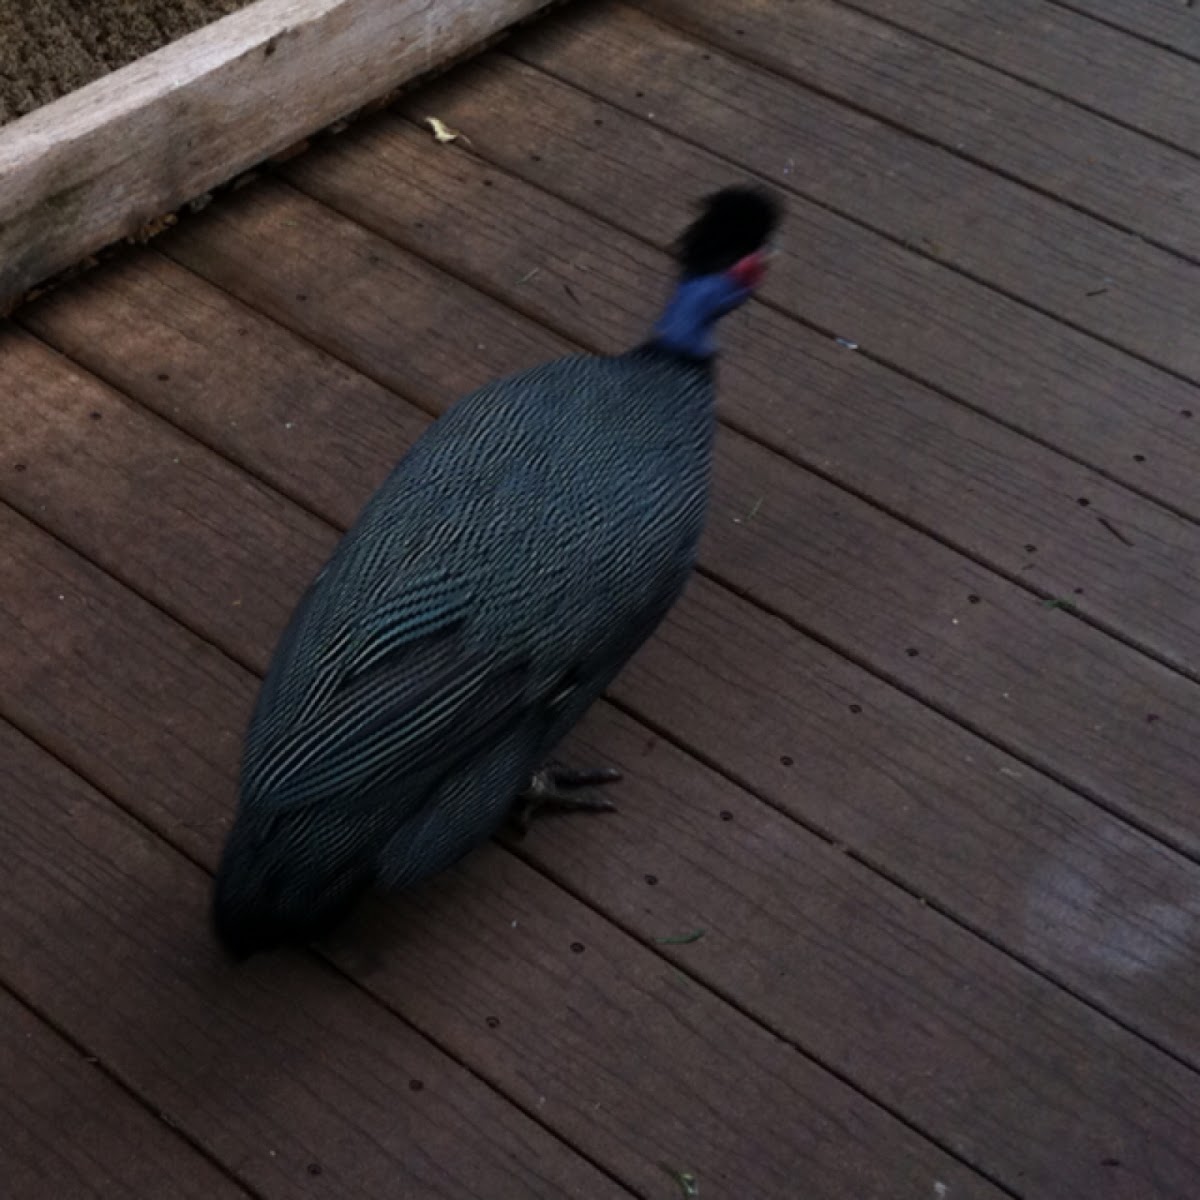 Black crested guineafowl